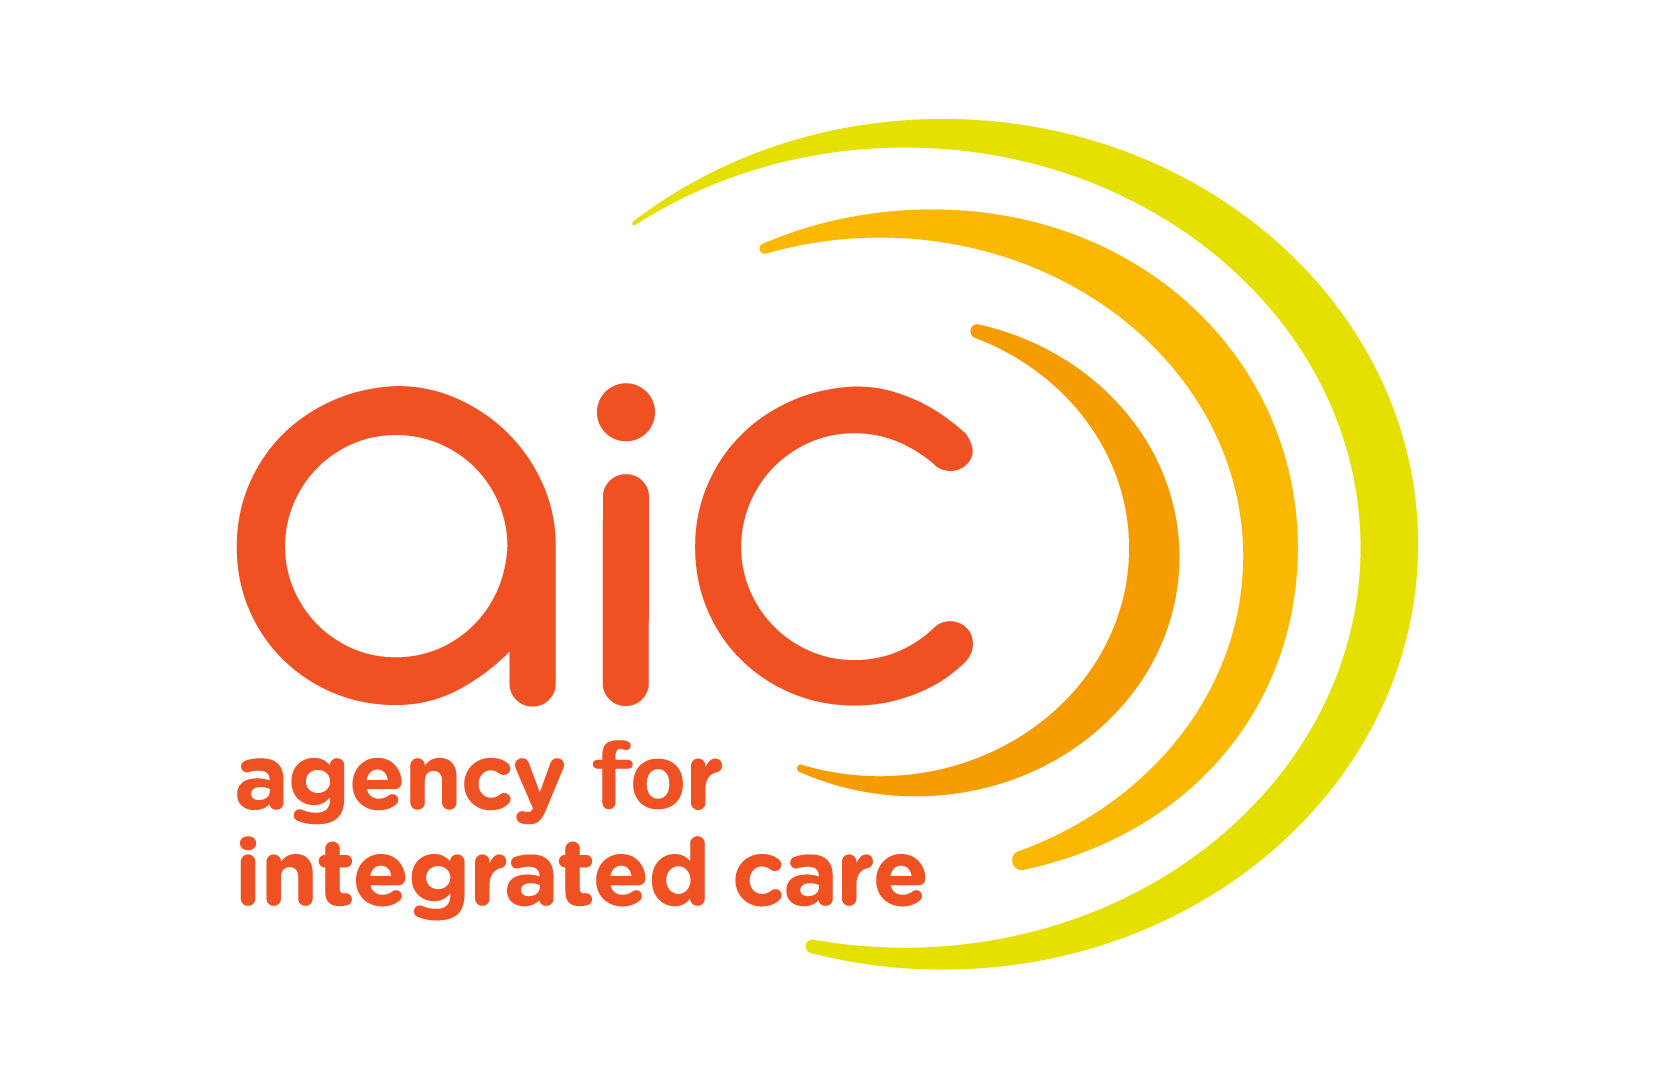 Agency for Integrated Care (AIC)